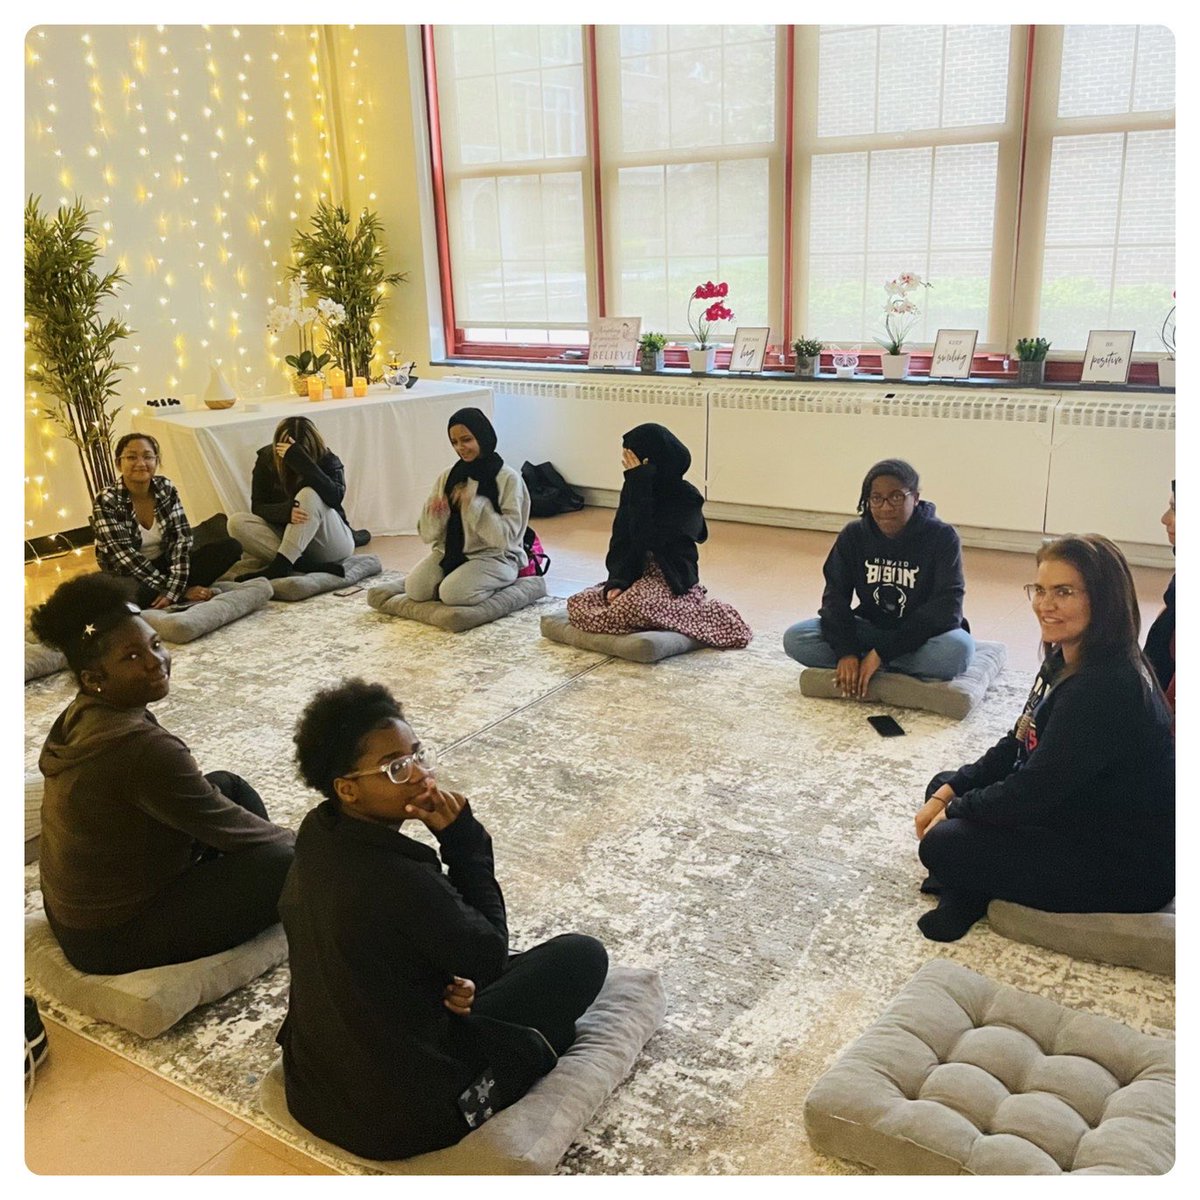 MSK at Roosevelt HS-ECS explored the mindful foundations of sisterhood and community in the newly opened Roosevelt Restorative Room. ⁦@RcollinsJudon⁩ ⁦@YonkersMSK⁩ ⁦@a_dechent⁩ ⁦@girlsalliance⁩